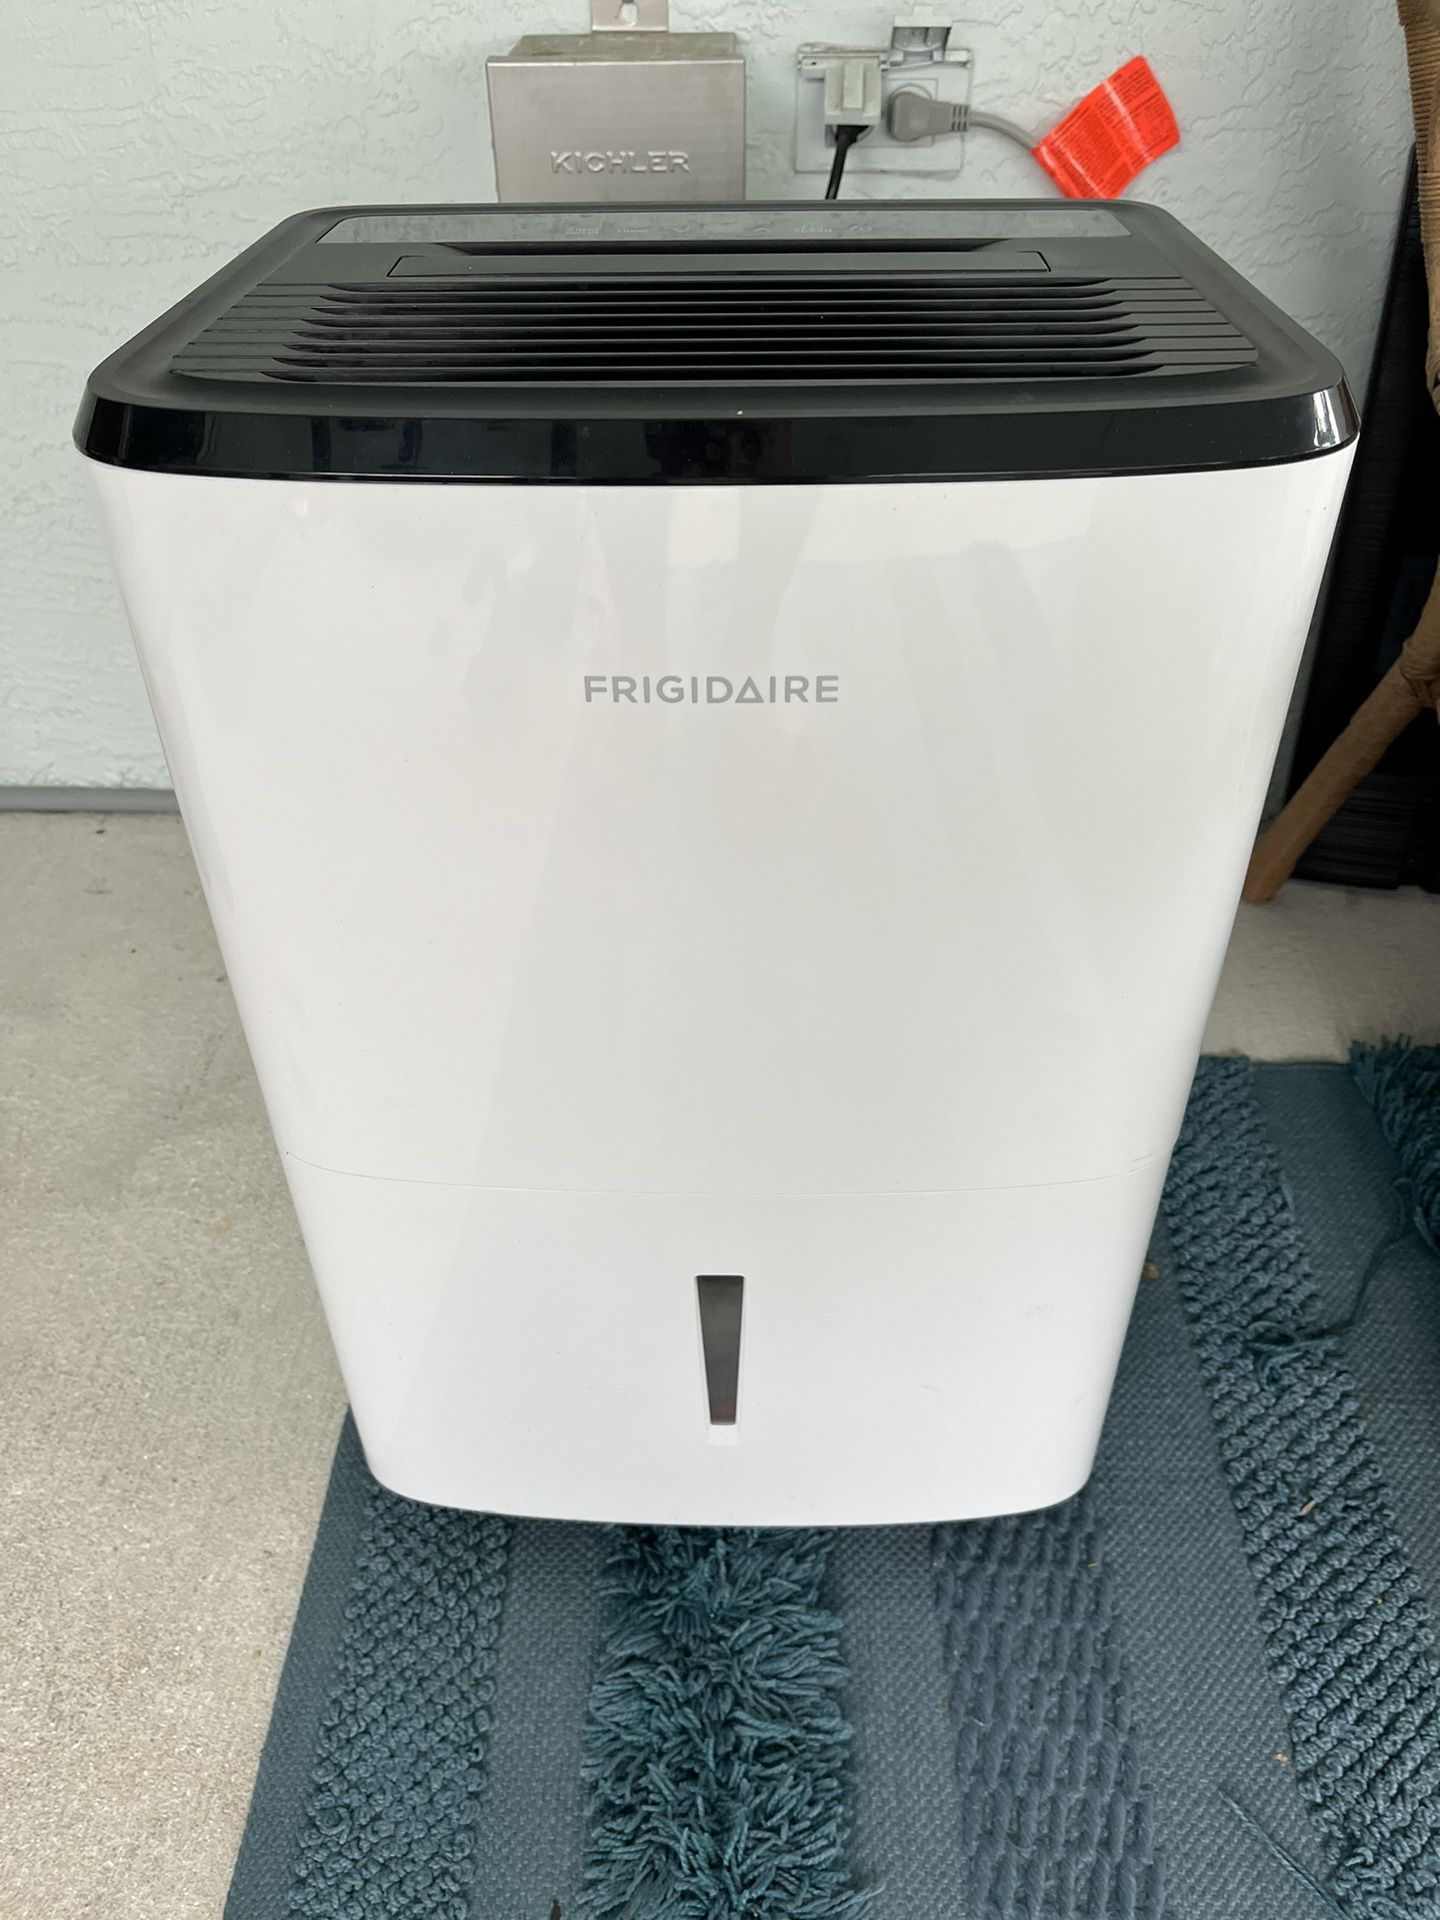 Frigidaire 50 pt. 1200 sq.ft. High Humidity Dehumidifier with Bucket in. White